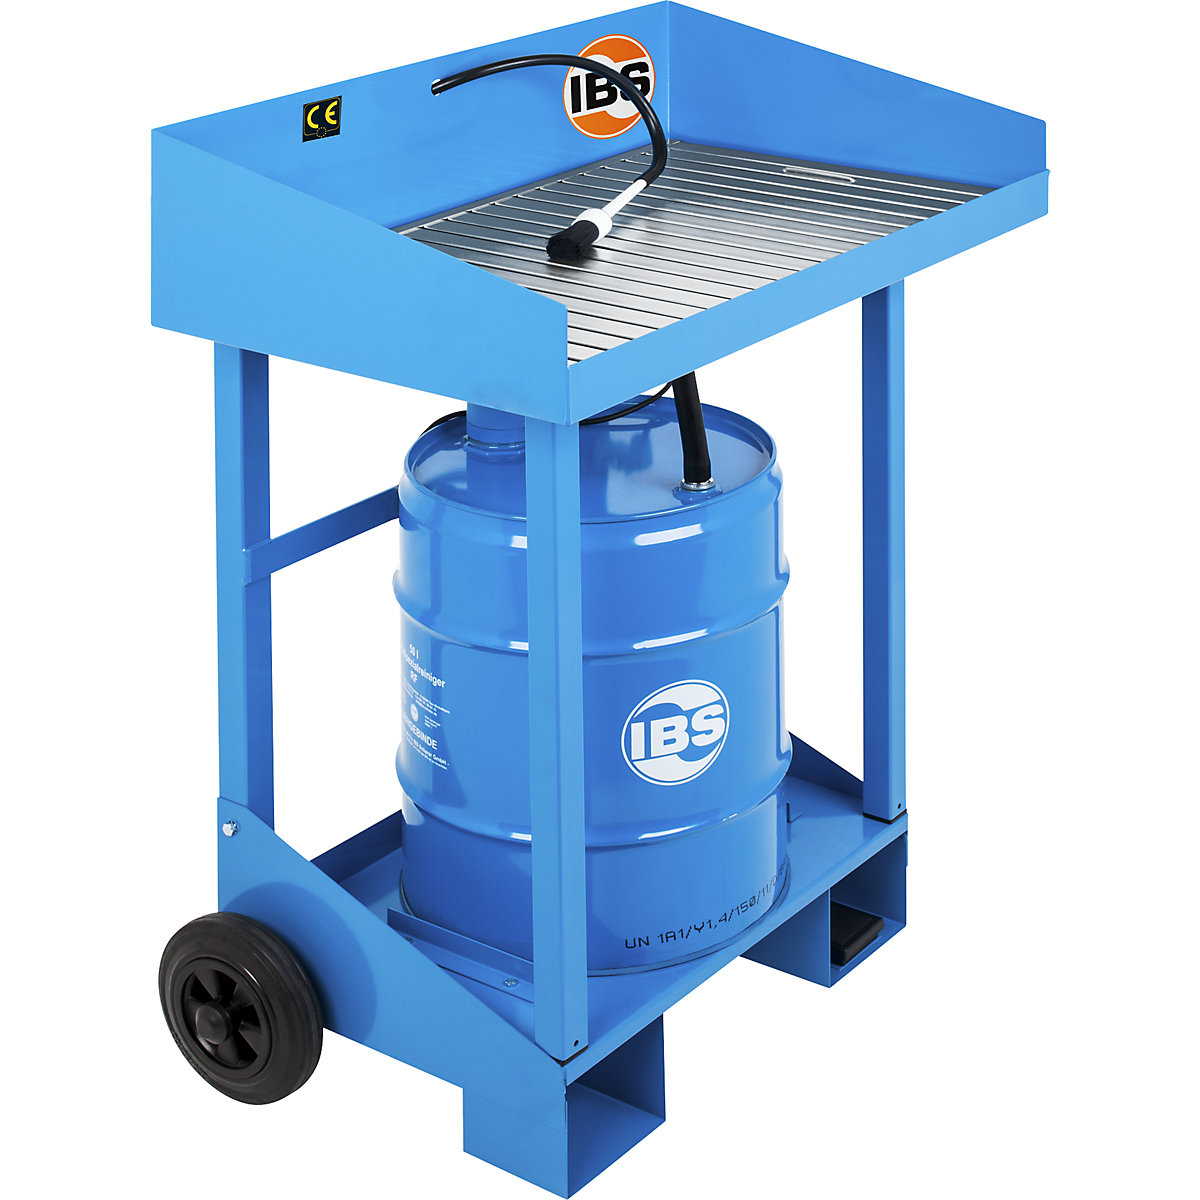 Mobile small parts cleaner - IBS Scherer